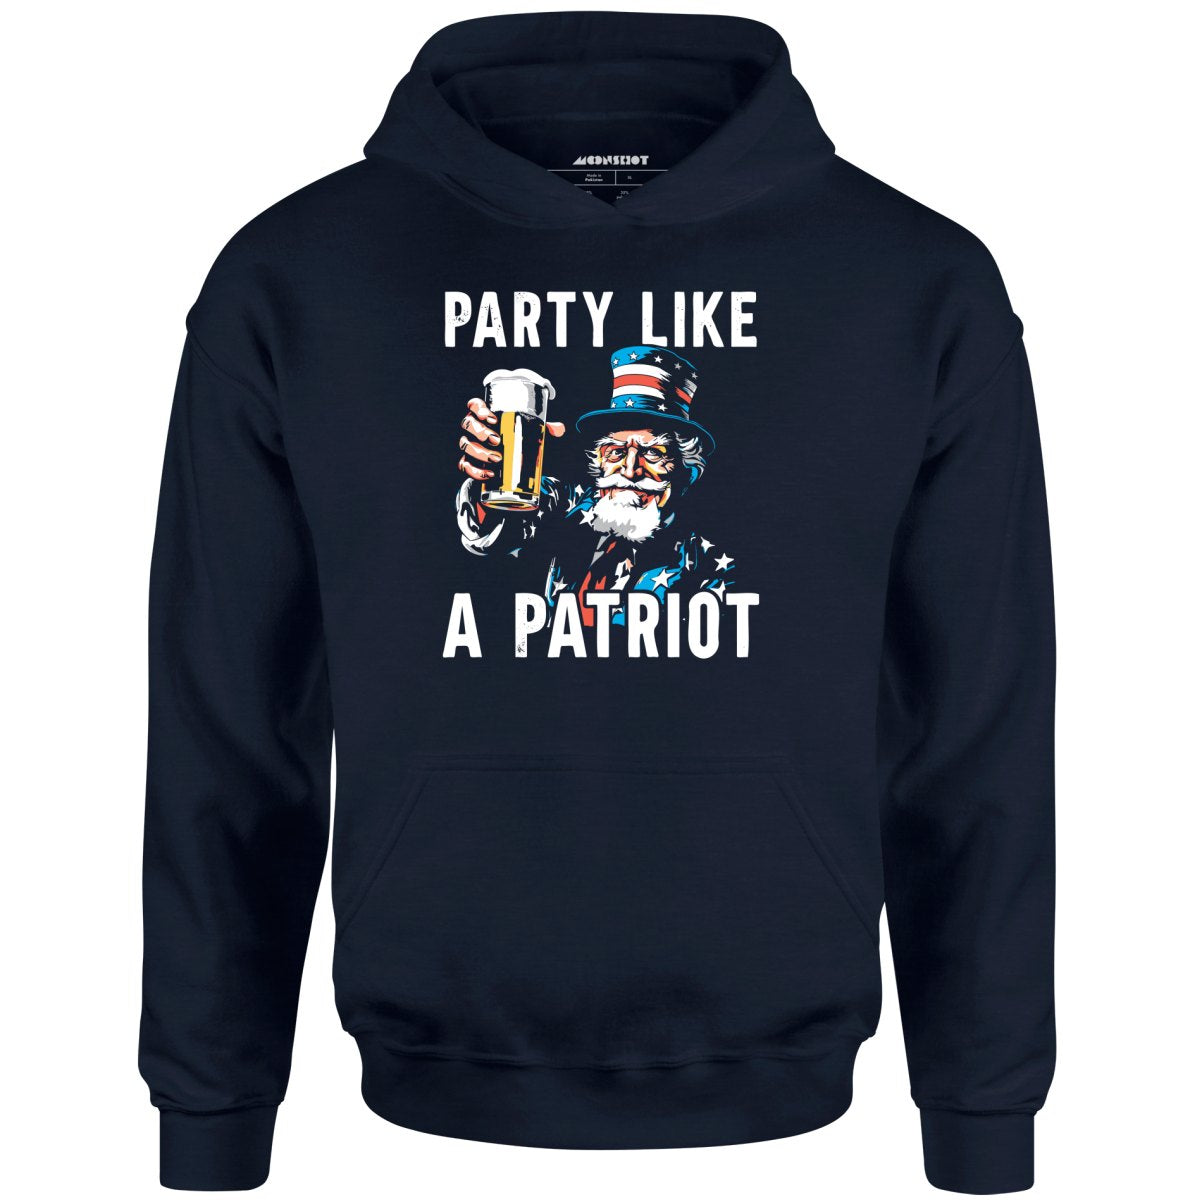 Party Like a Patriot - Unisex Hoodie